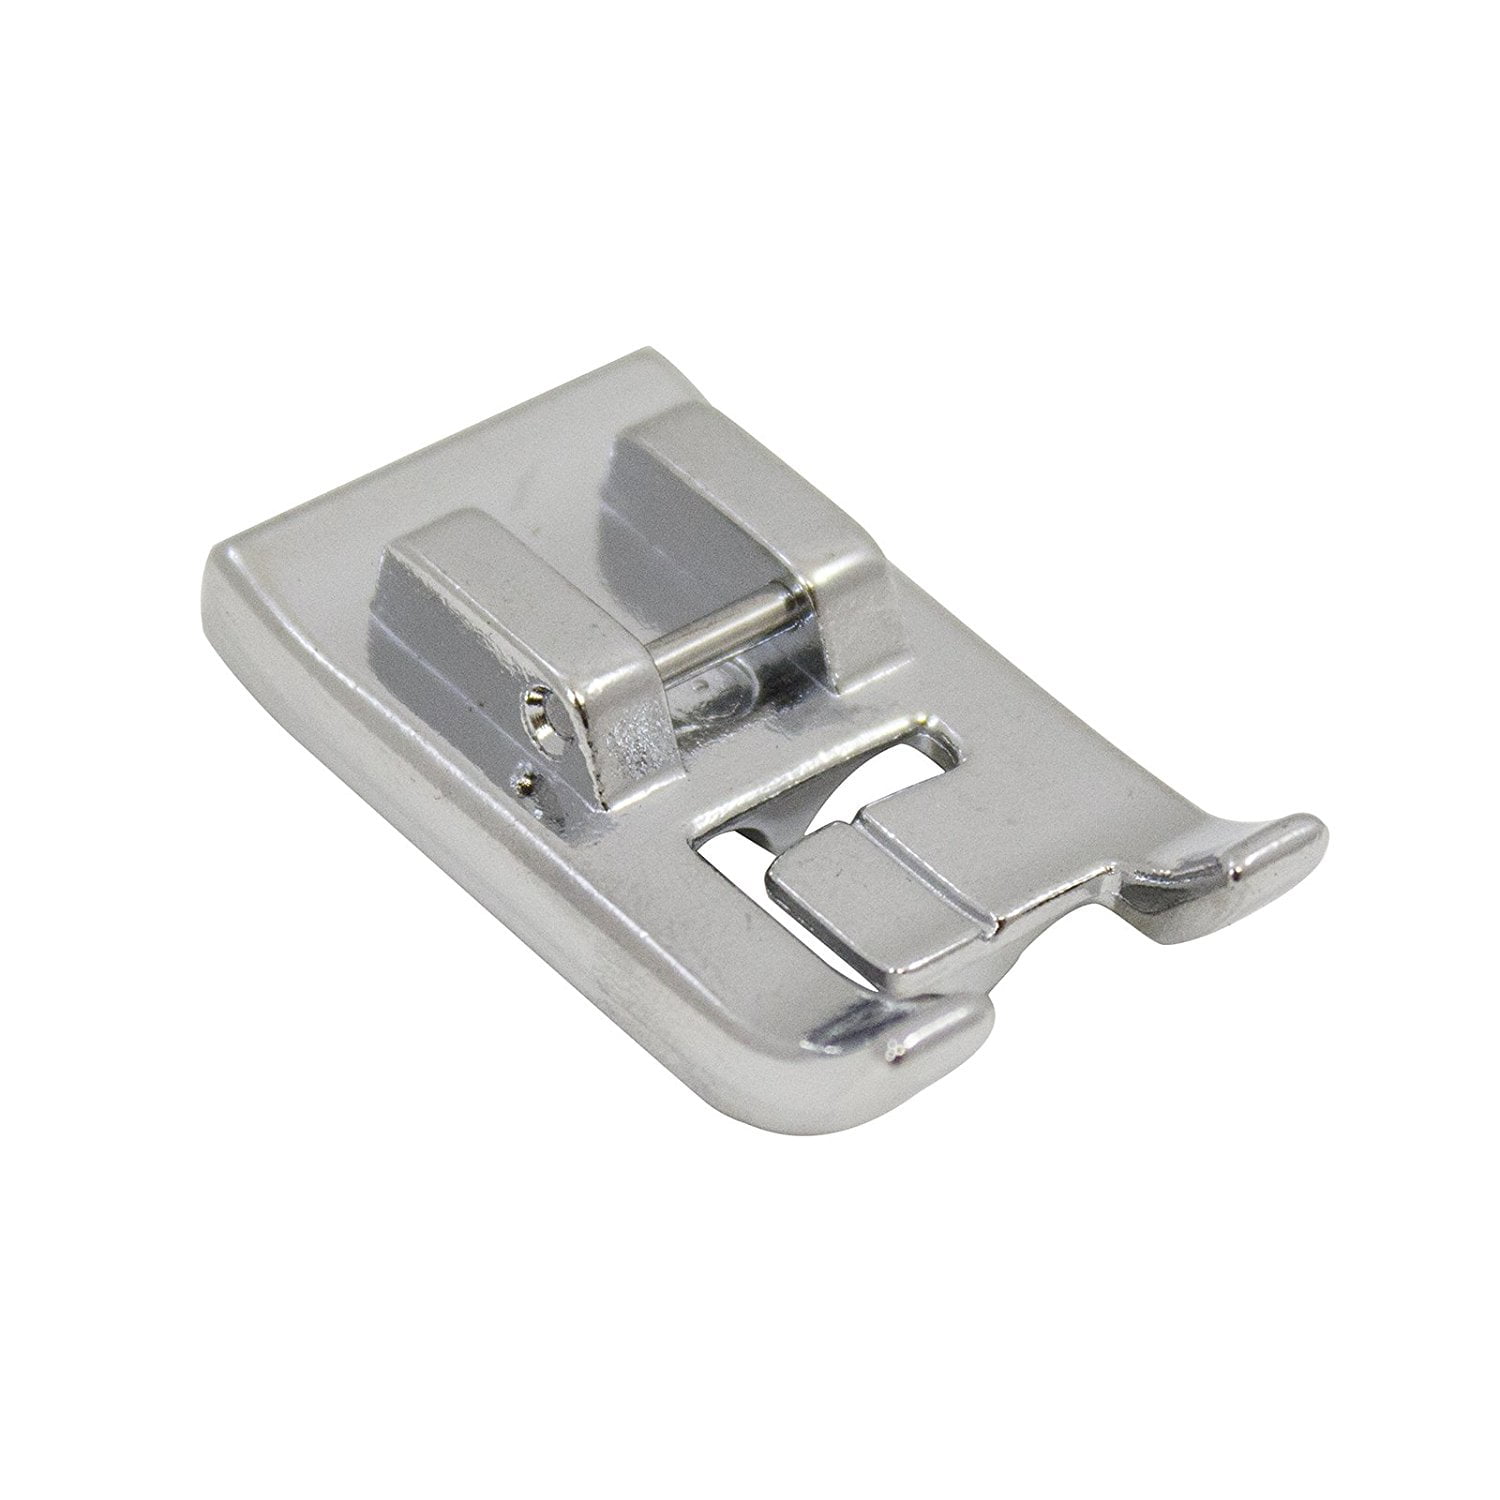 Sewing Machine Foot Pedal Model J2 For Baby Lock & Brother Machines - See  Photos